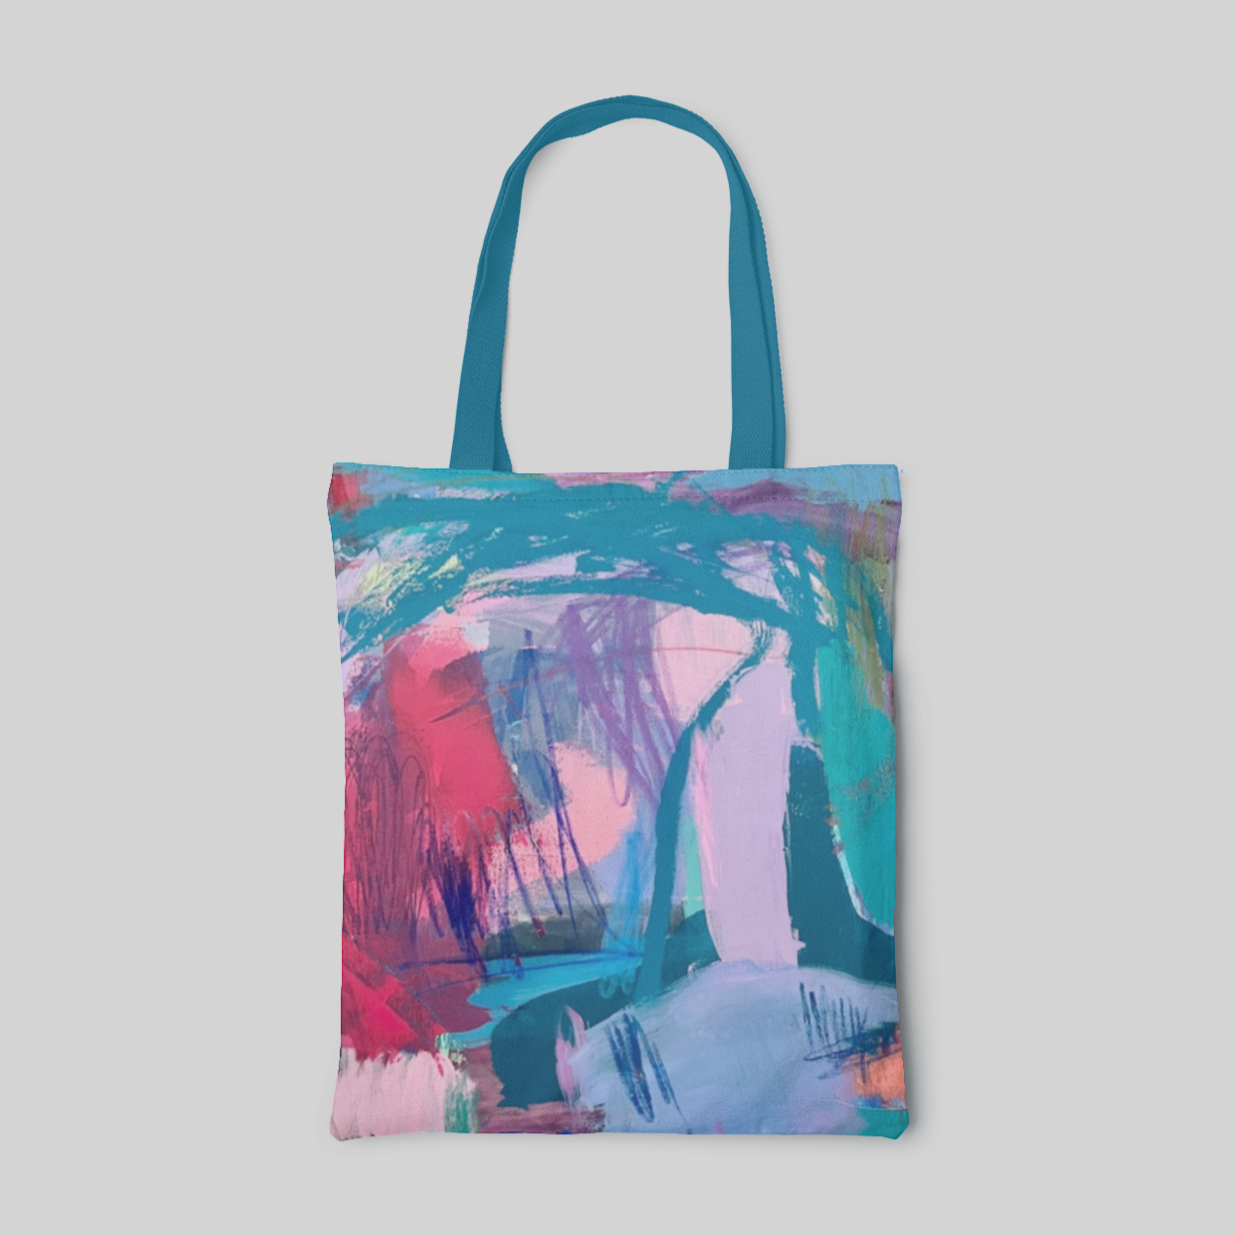 abstract designed tote bag with turquoise, green, pink and purple strokes, front side